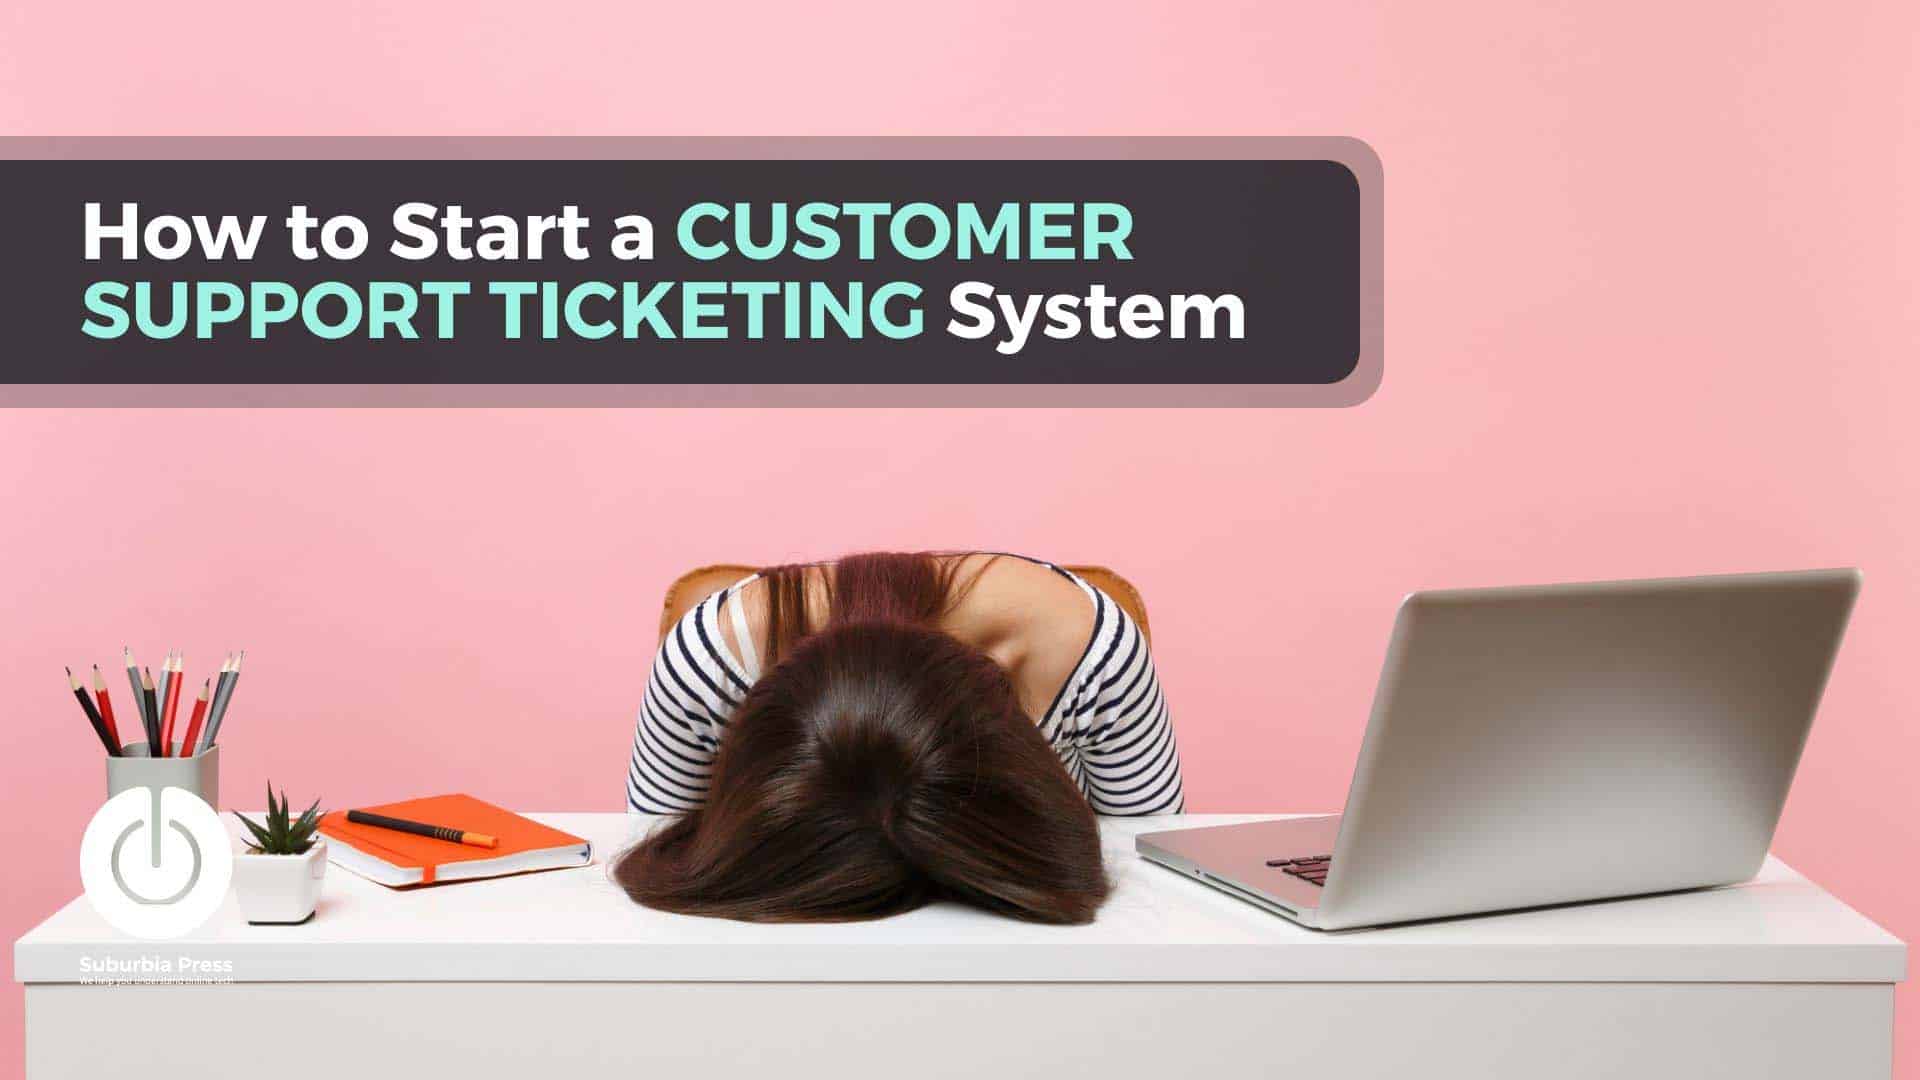 Start a Customer Support Ticketing System